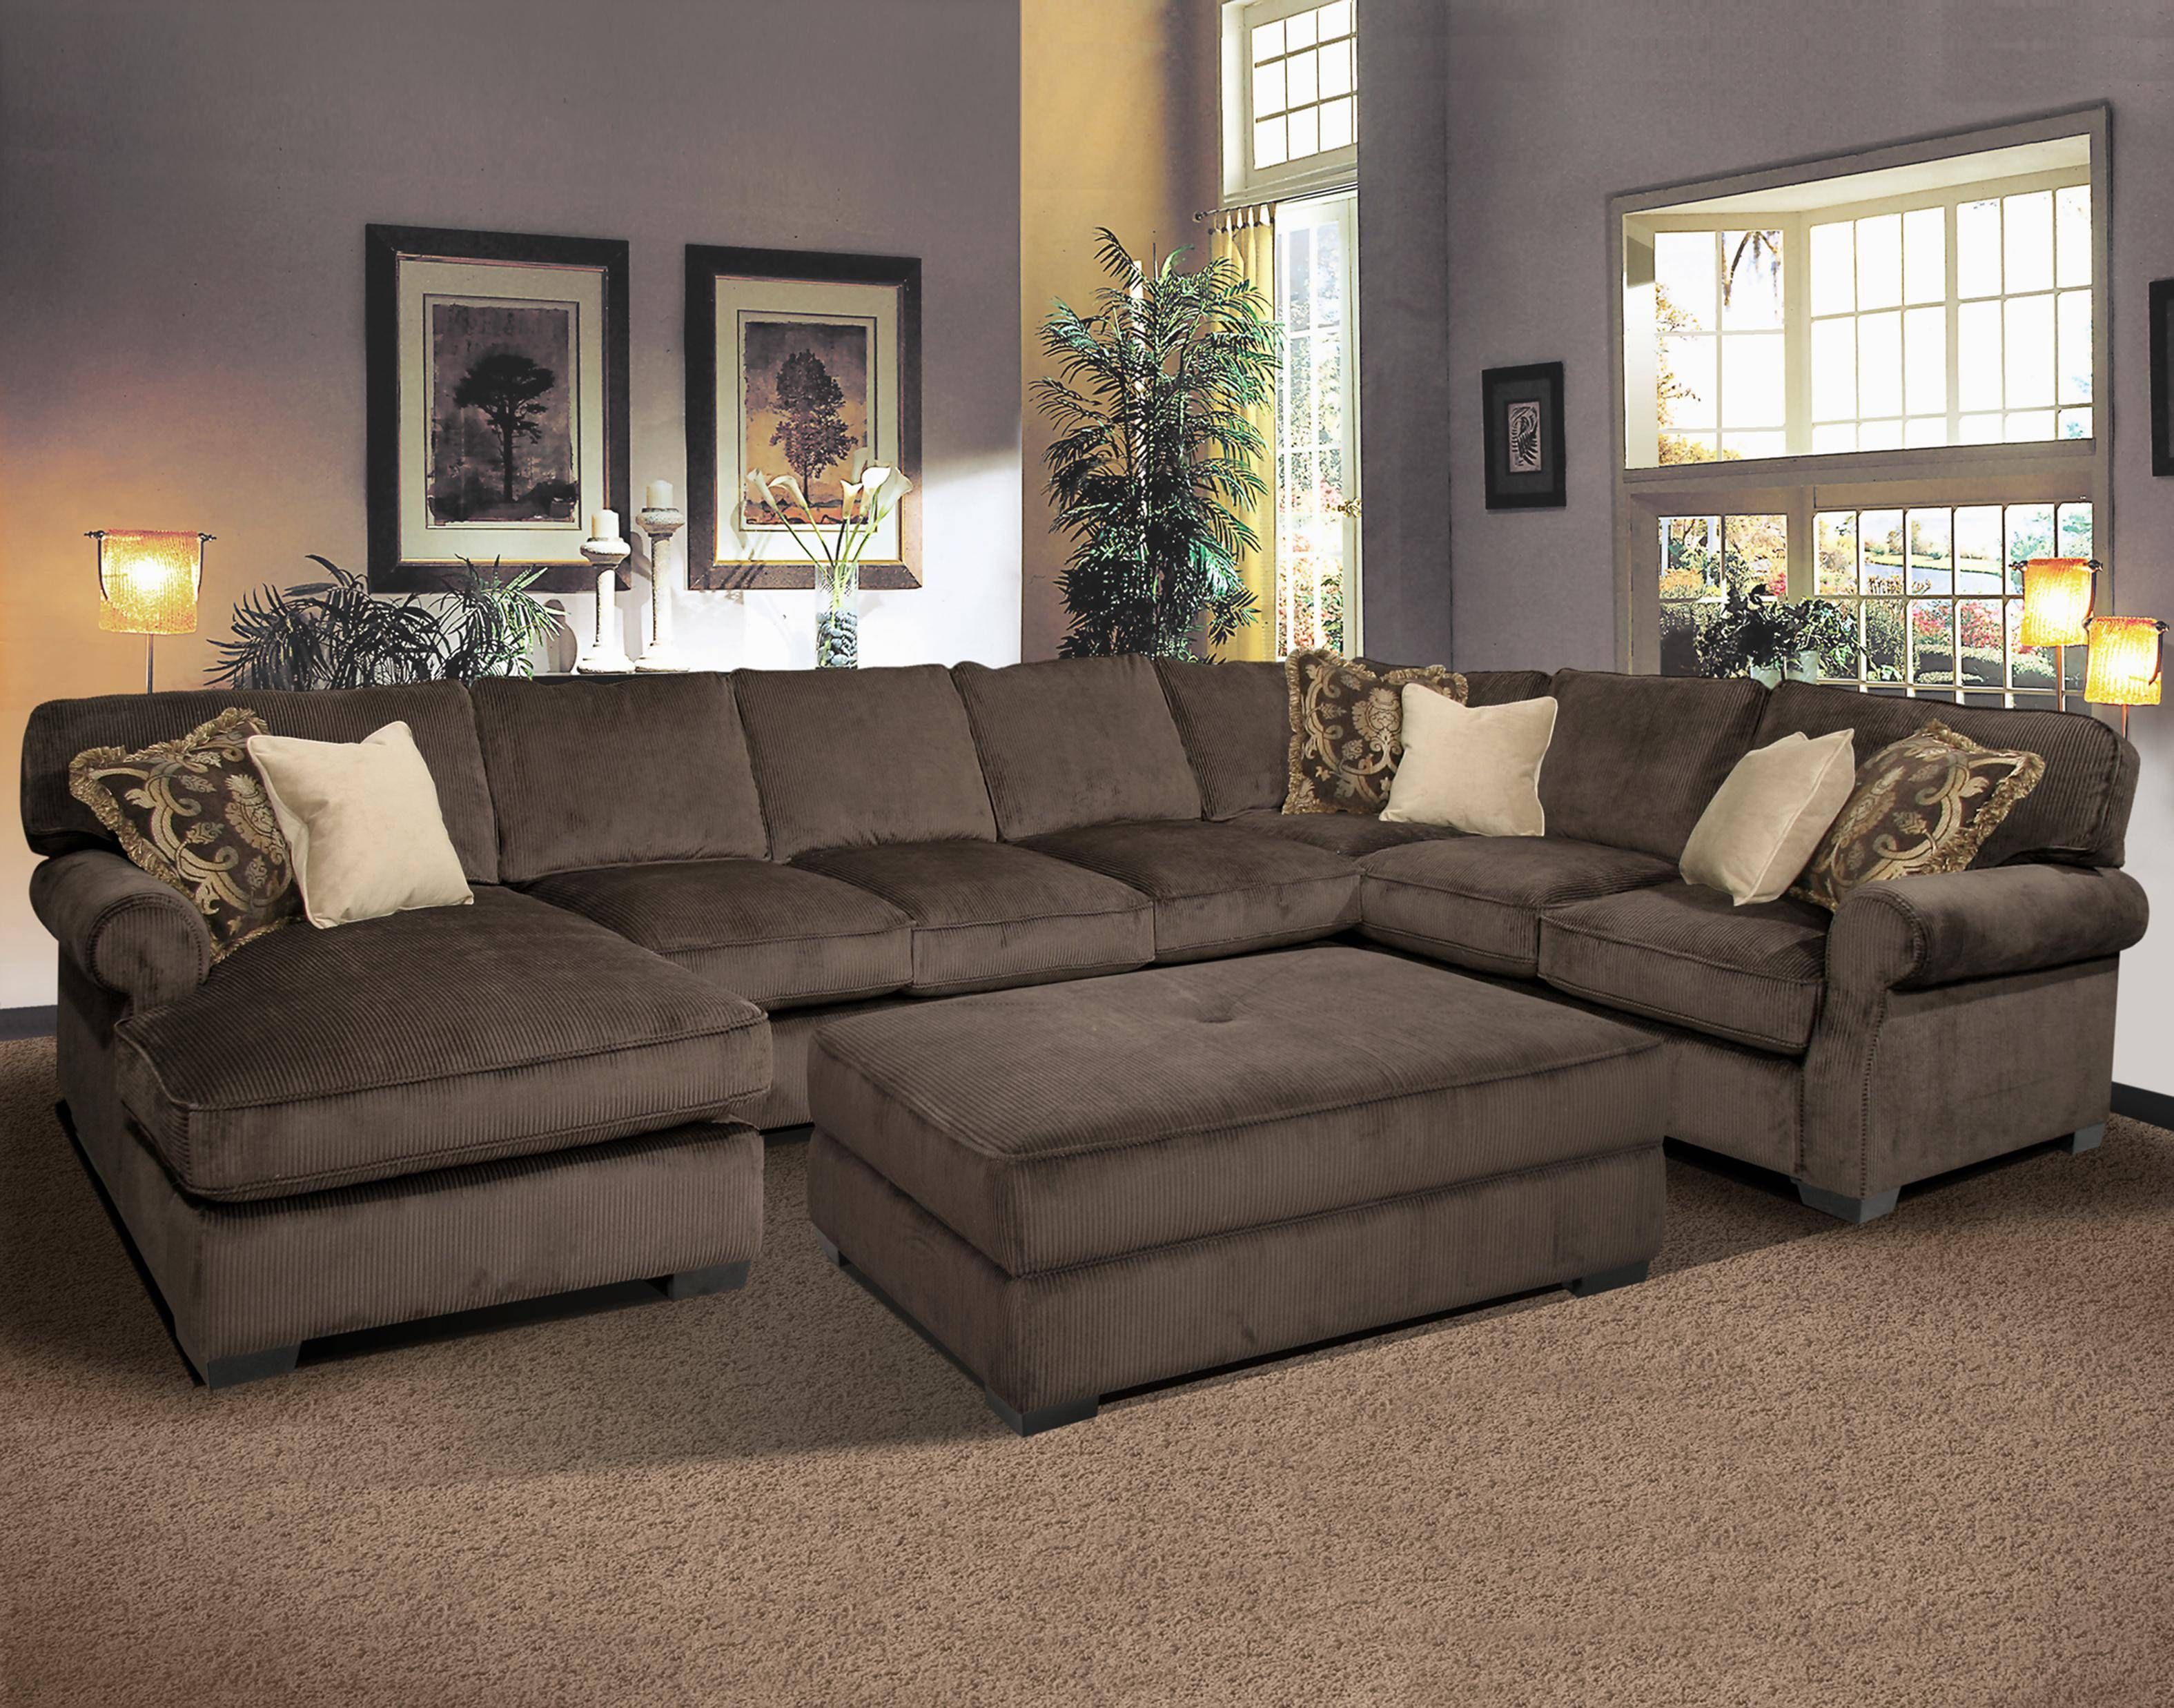 Awesome Sectional Sofa With Recliner And Chaise Lounge 45 With In Queen Sleeper Sofa Sheets 